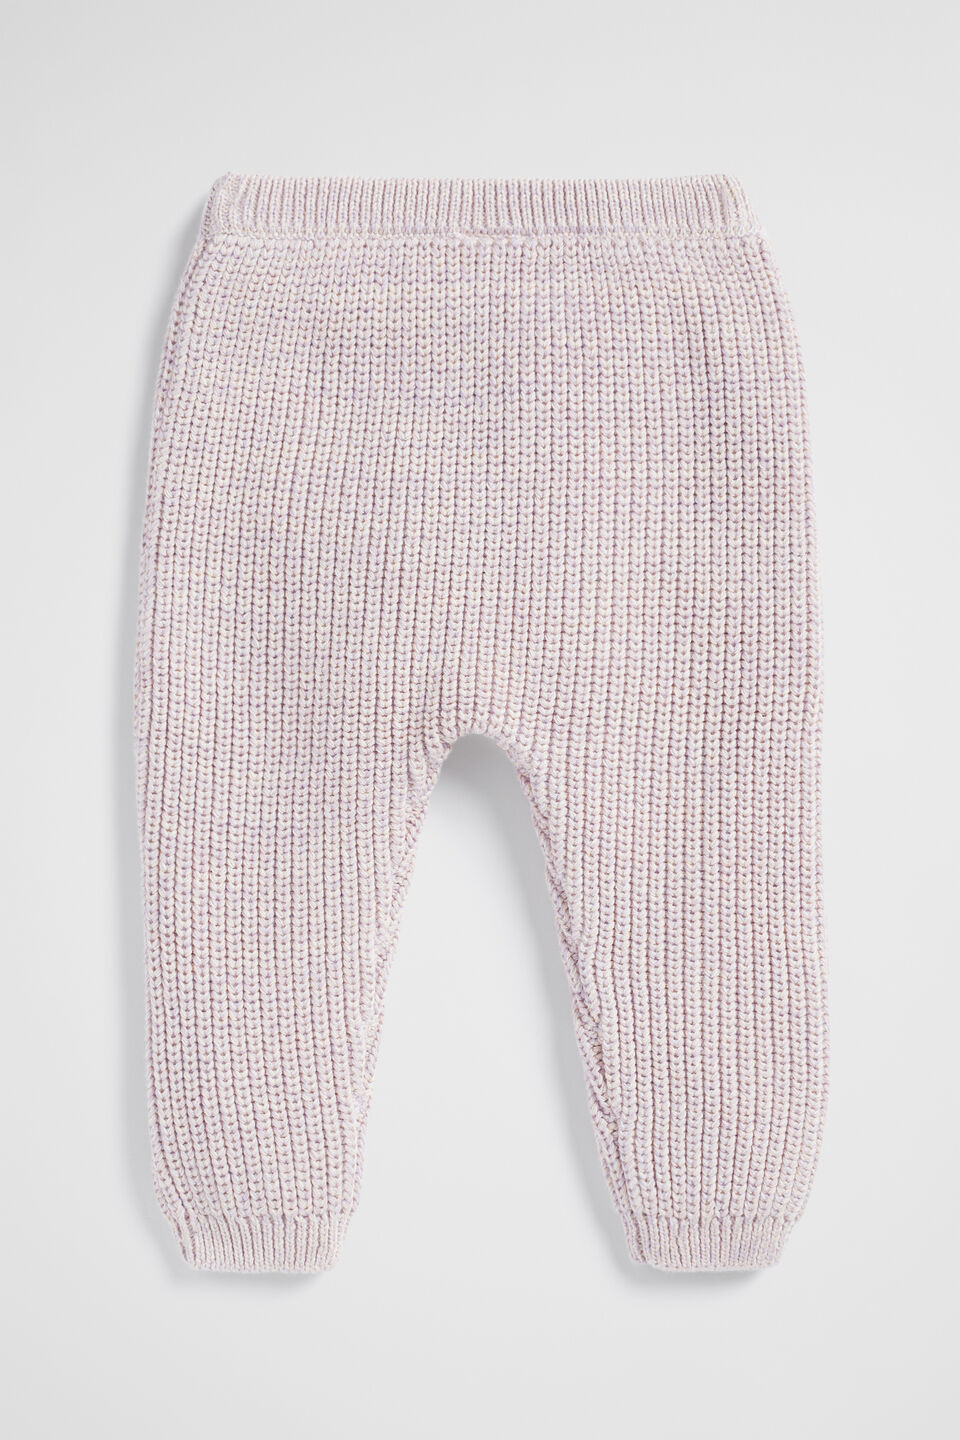 Mixy Knit Legging  Pale Orchid